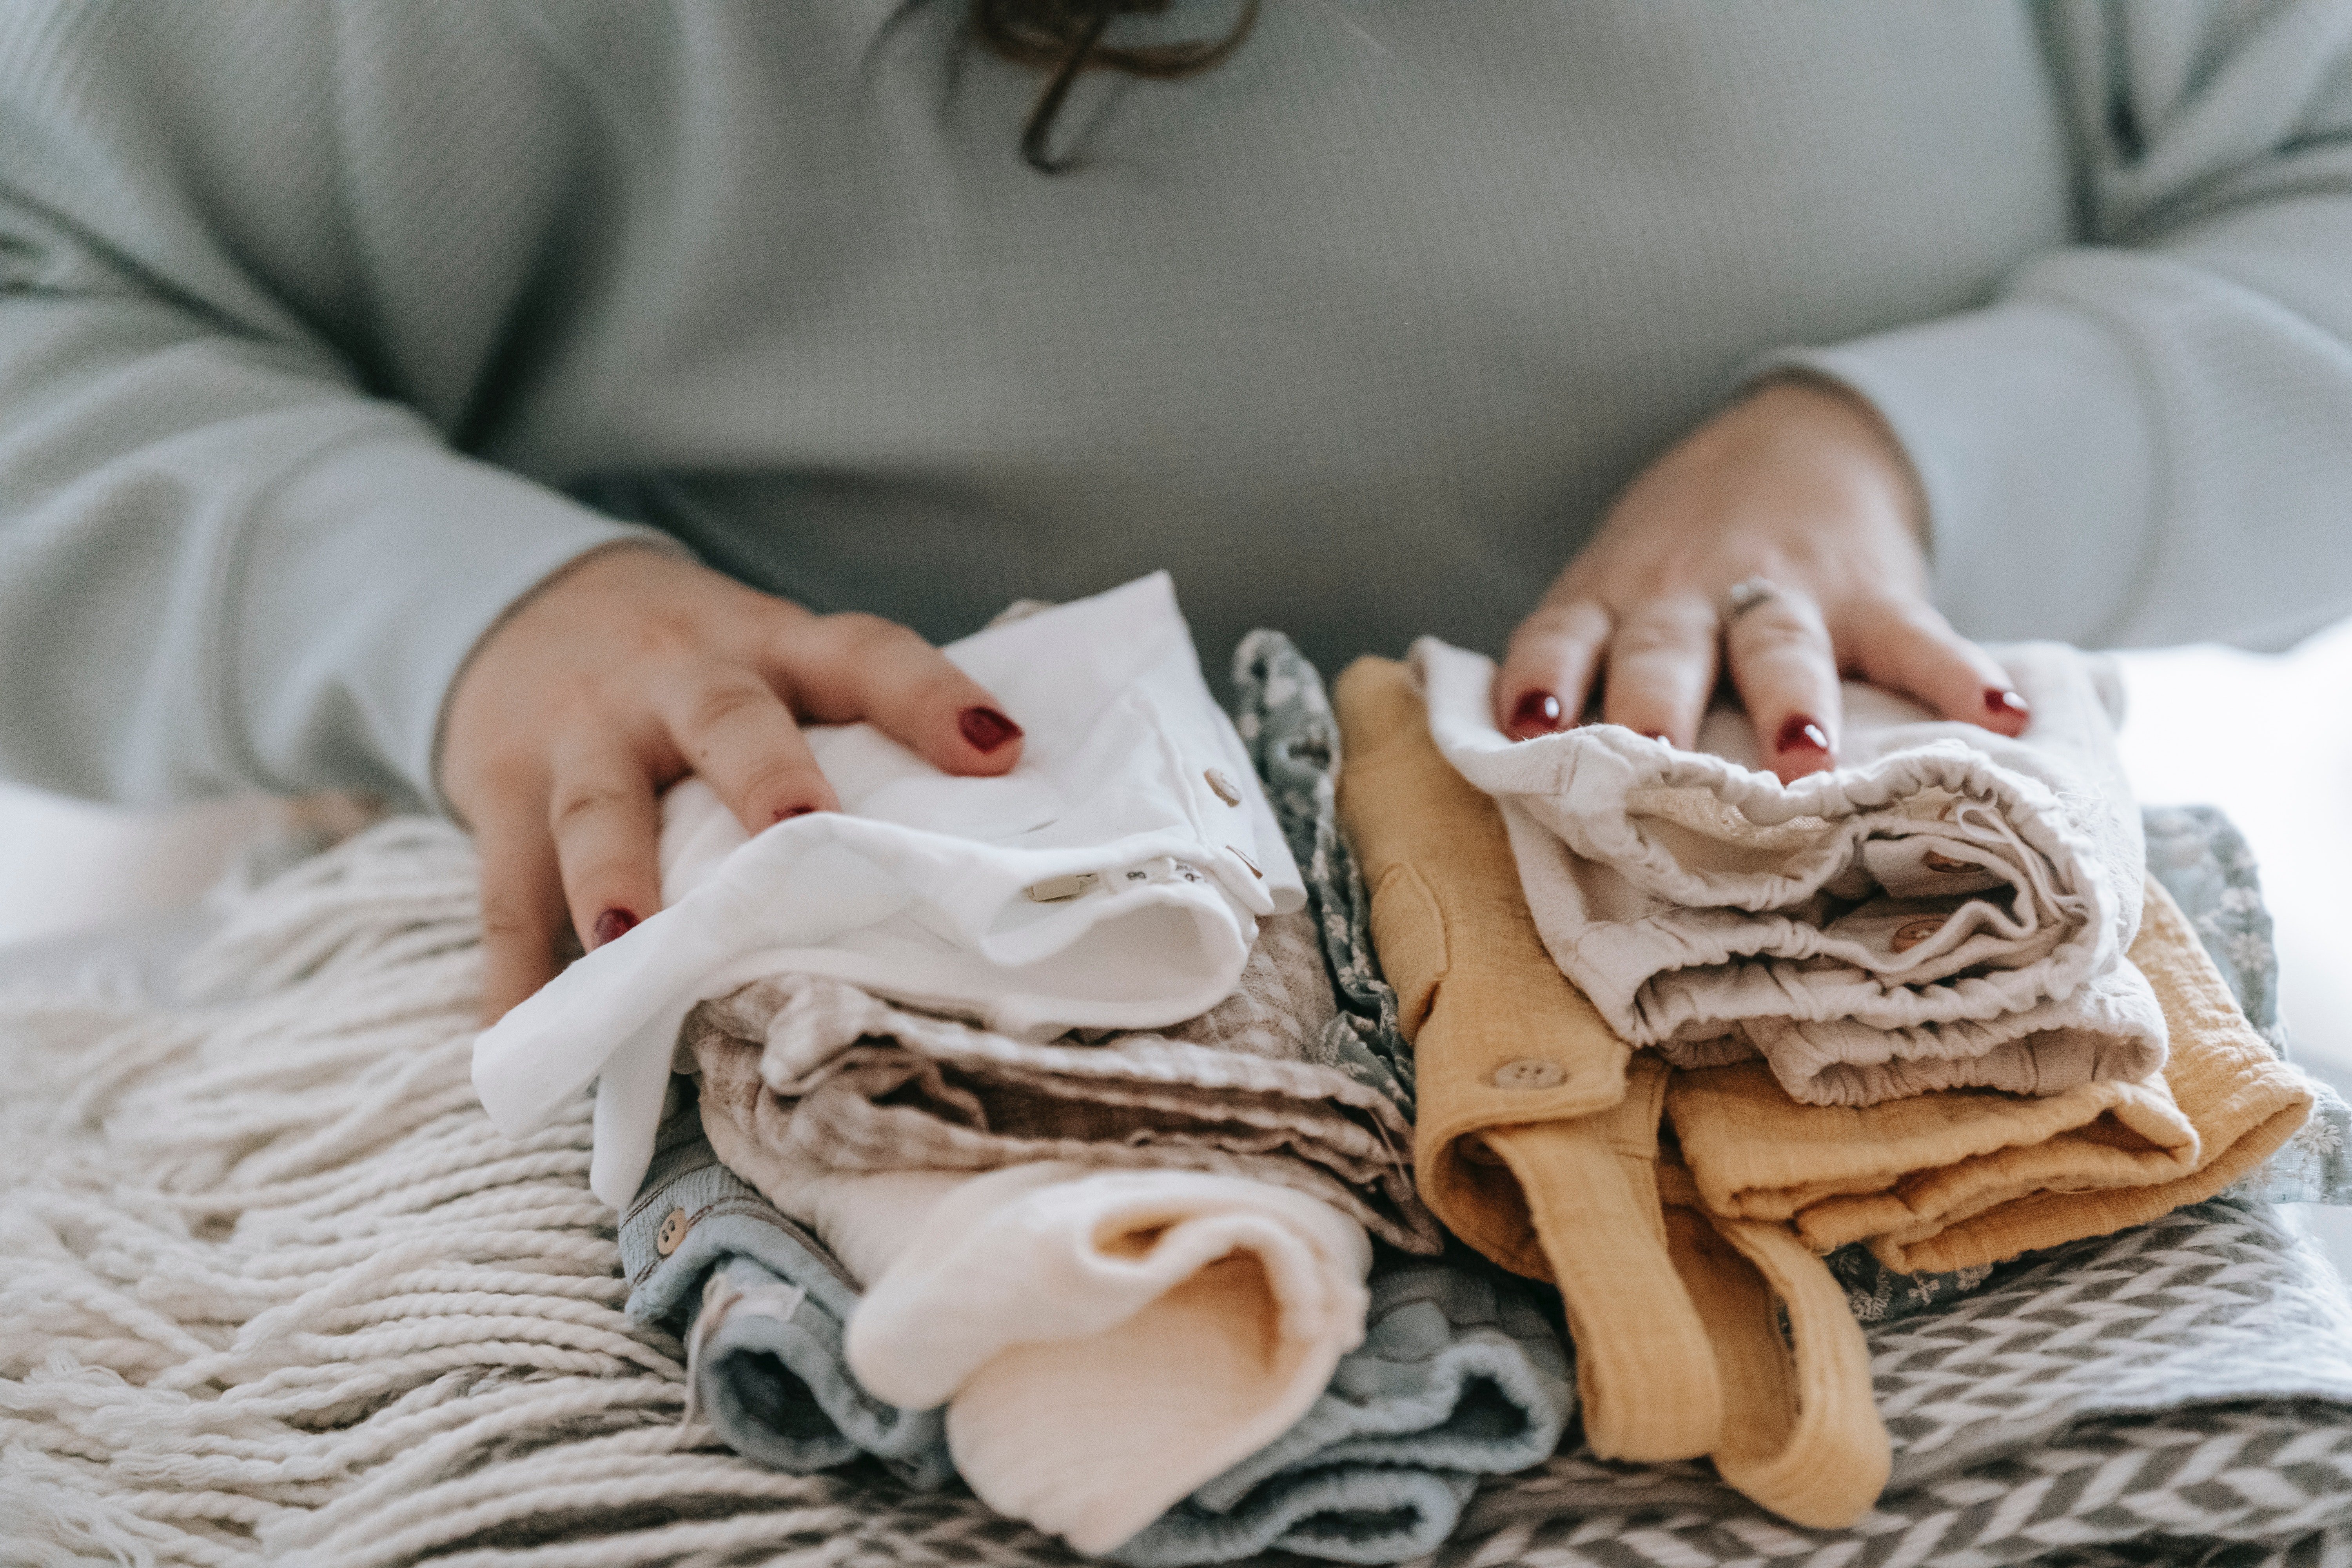 Grace excitedly prepared for her child's arrival. | Source: Pexels